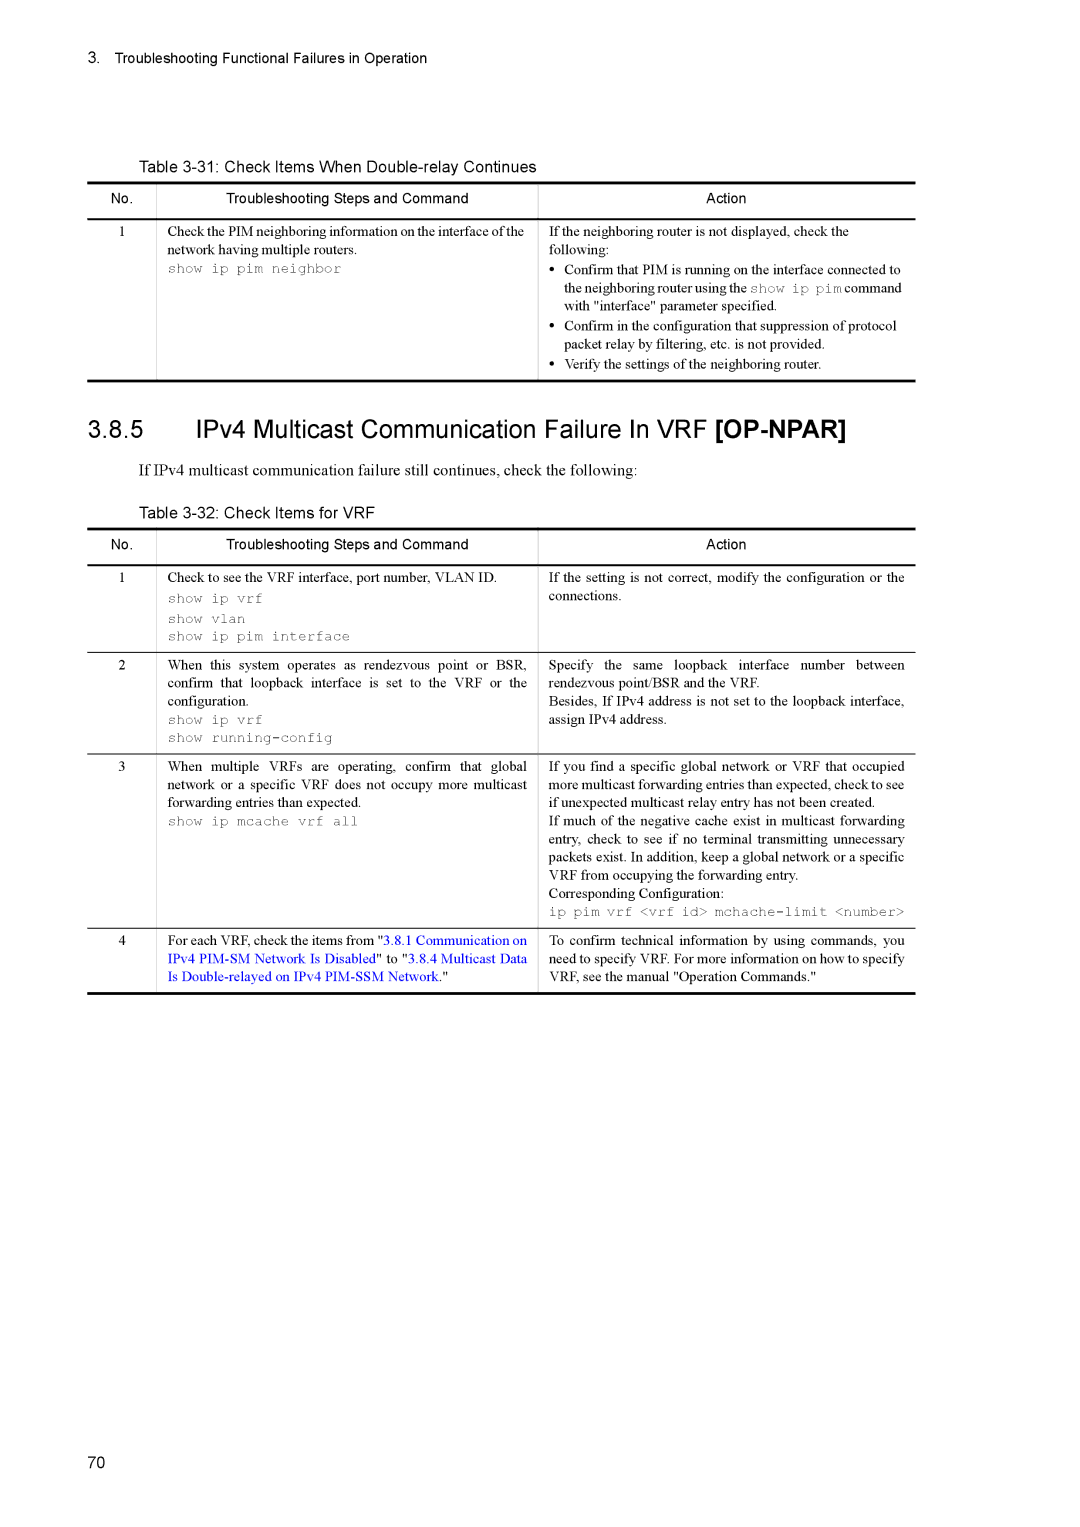 NEC IP8800/S2400 manual 5 IPv4 Multicast Communication Failure In VRF OP-NPAR, Check Items When Double-relay Continues 